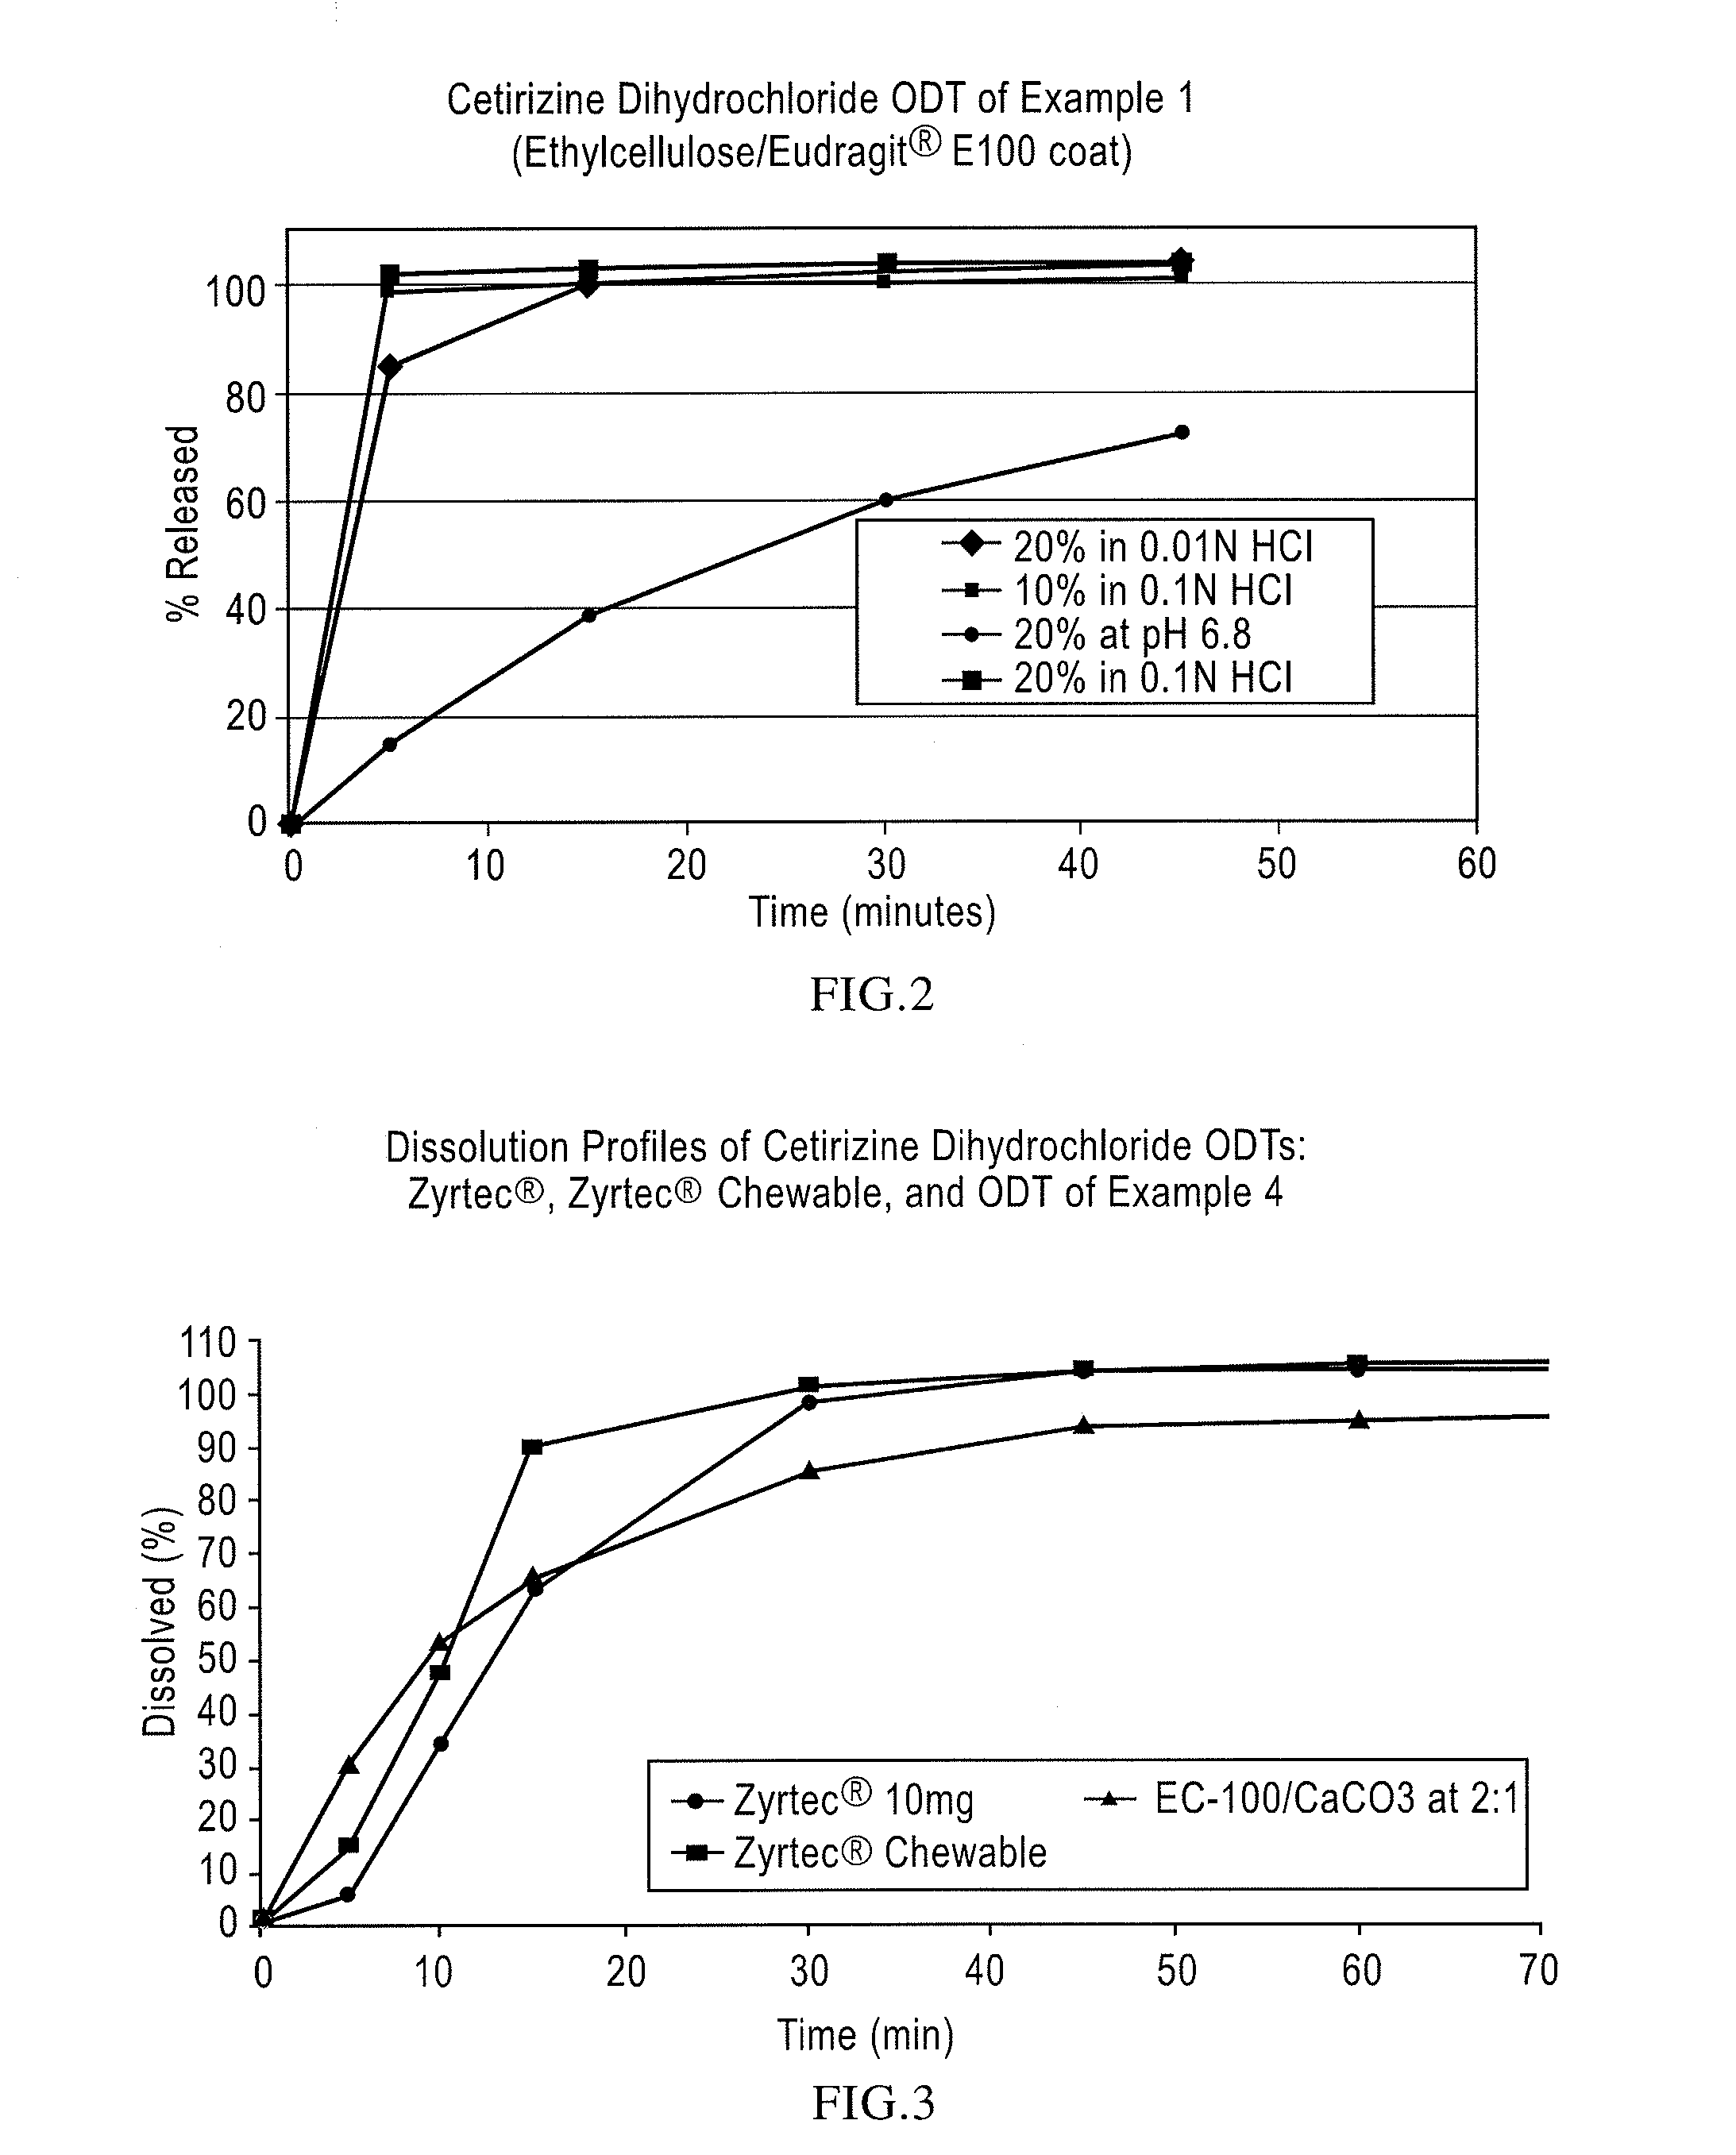 Pharmaceutical Compositions Comprising an Active Substance from the Substituted Benzhydrylpiperazine Family